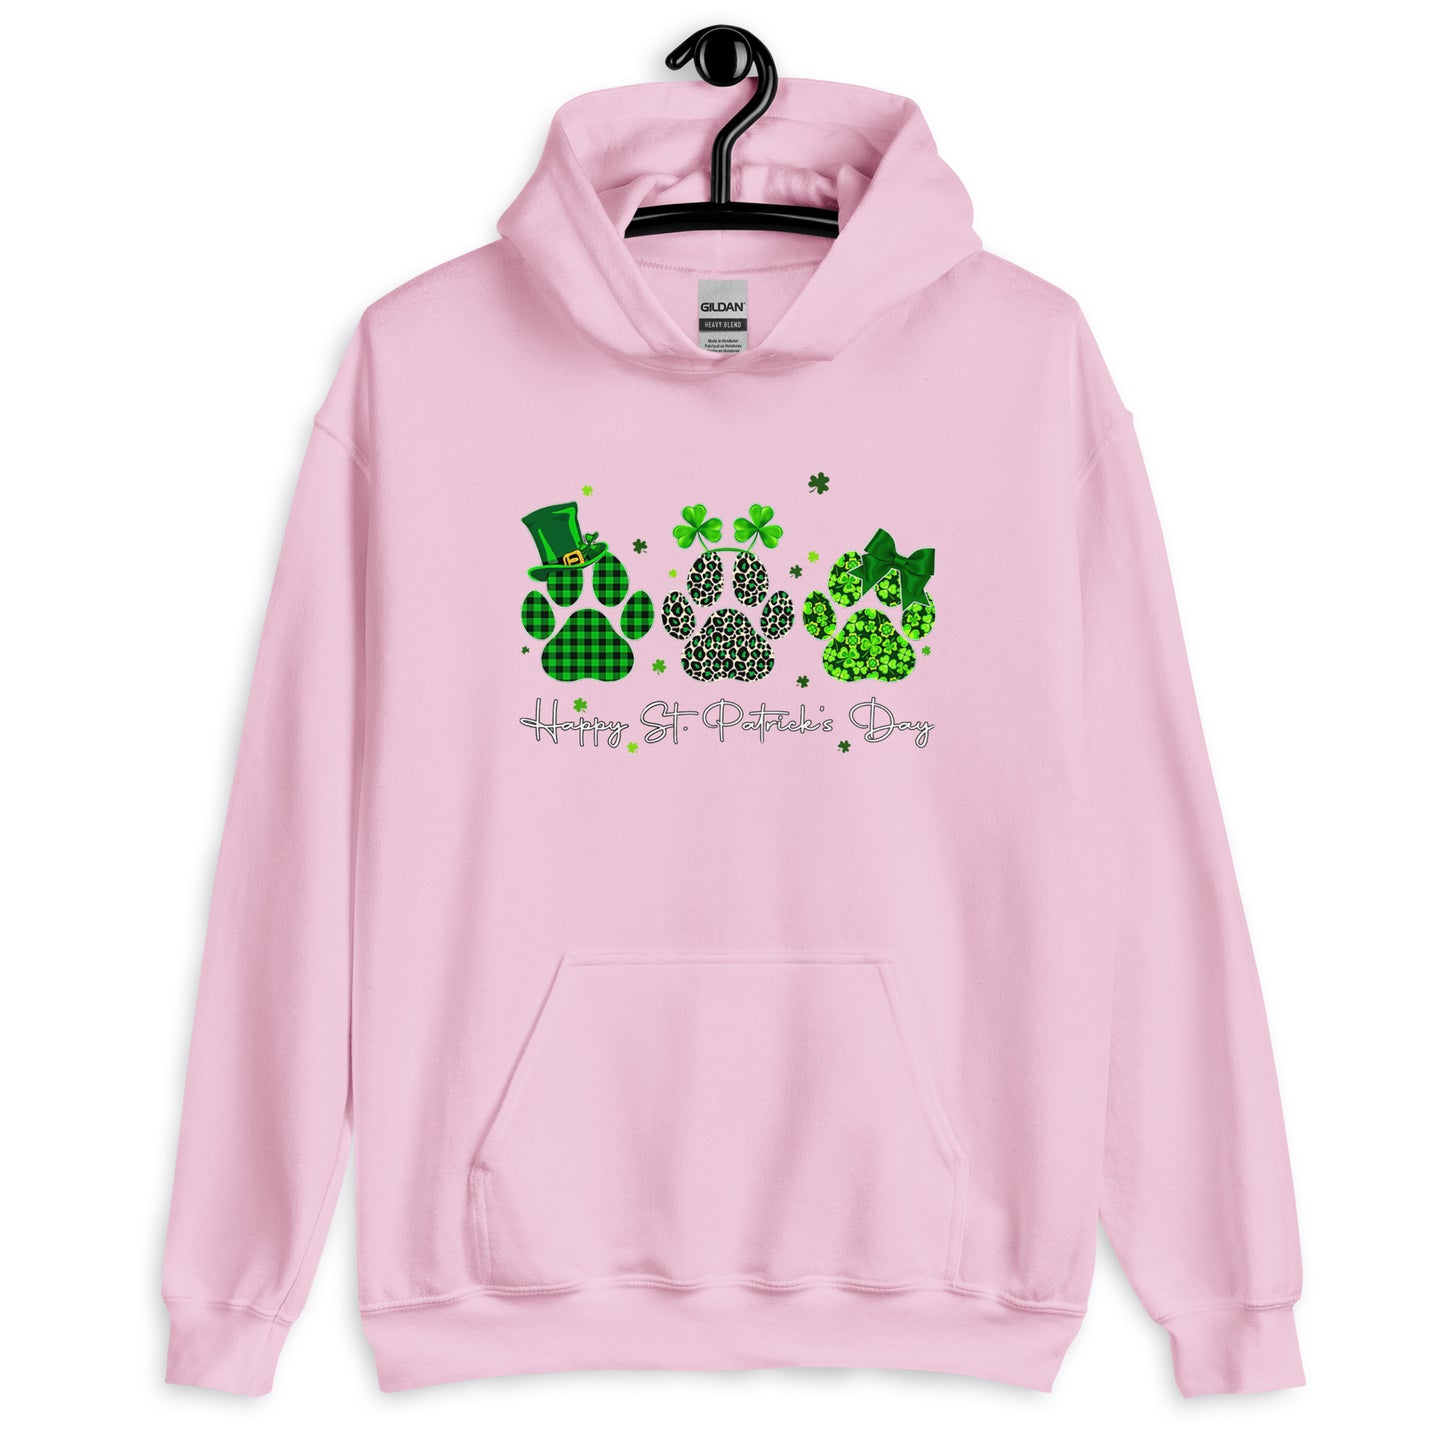 Shamrock Paw St. Patrick's Day Hoodie for Dog Lovers